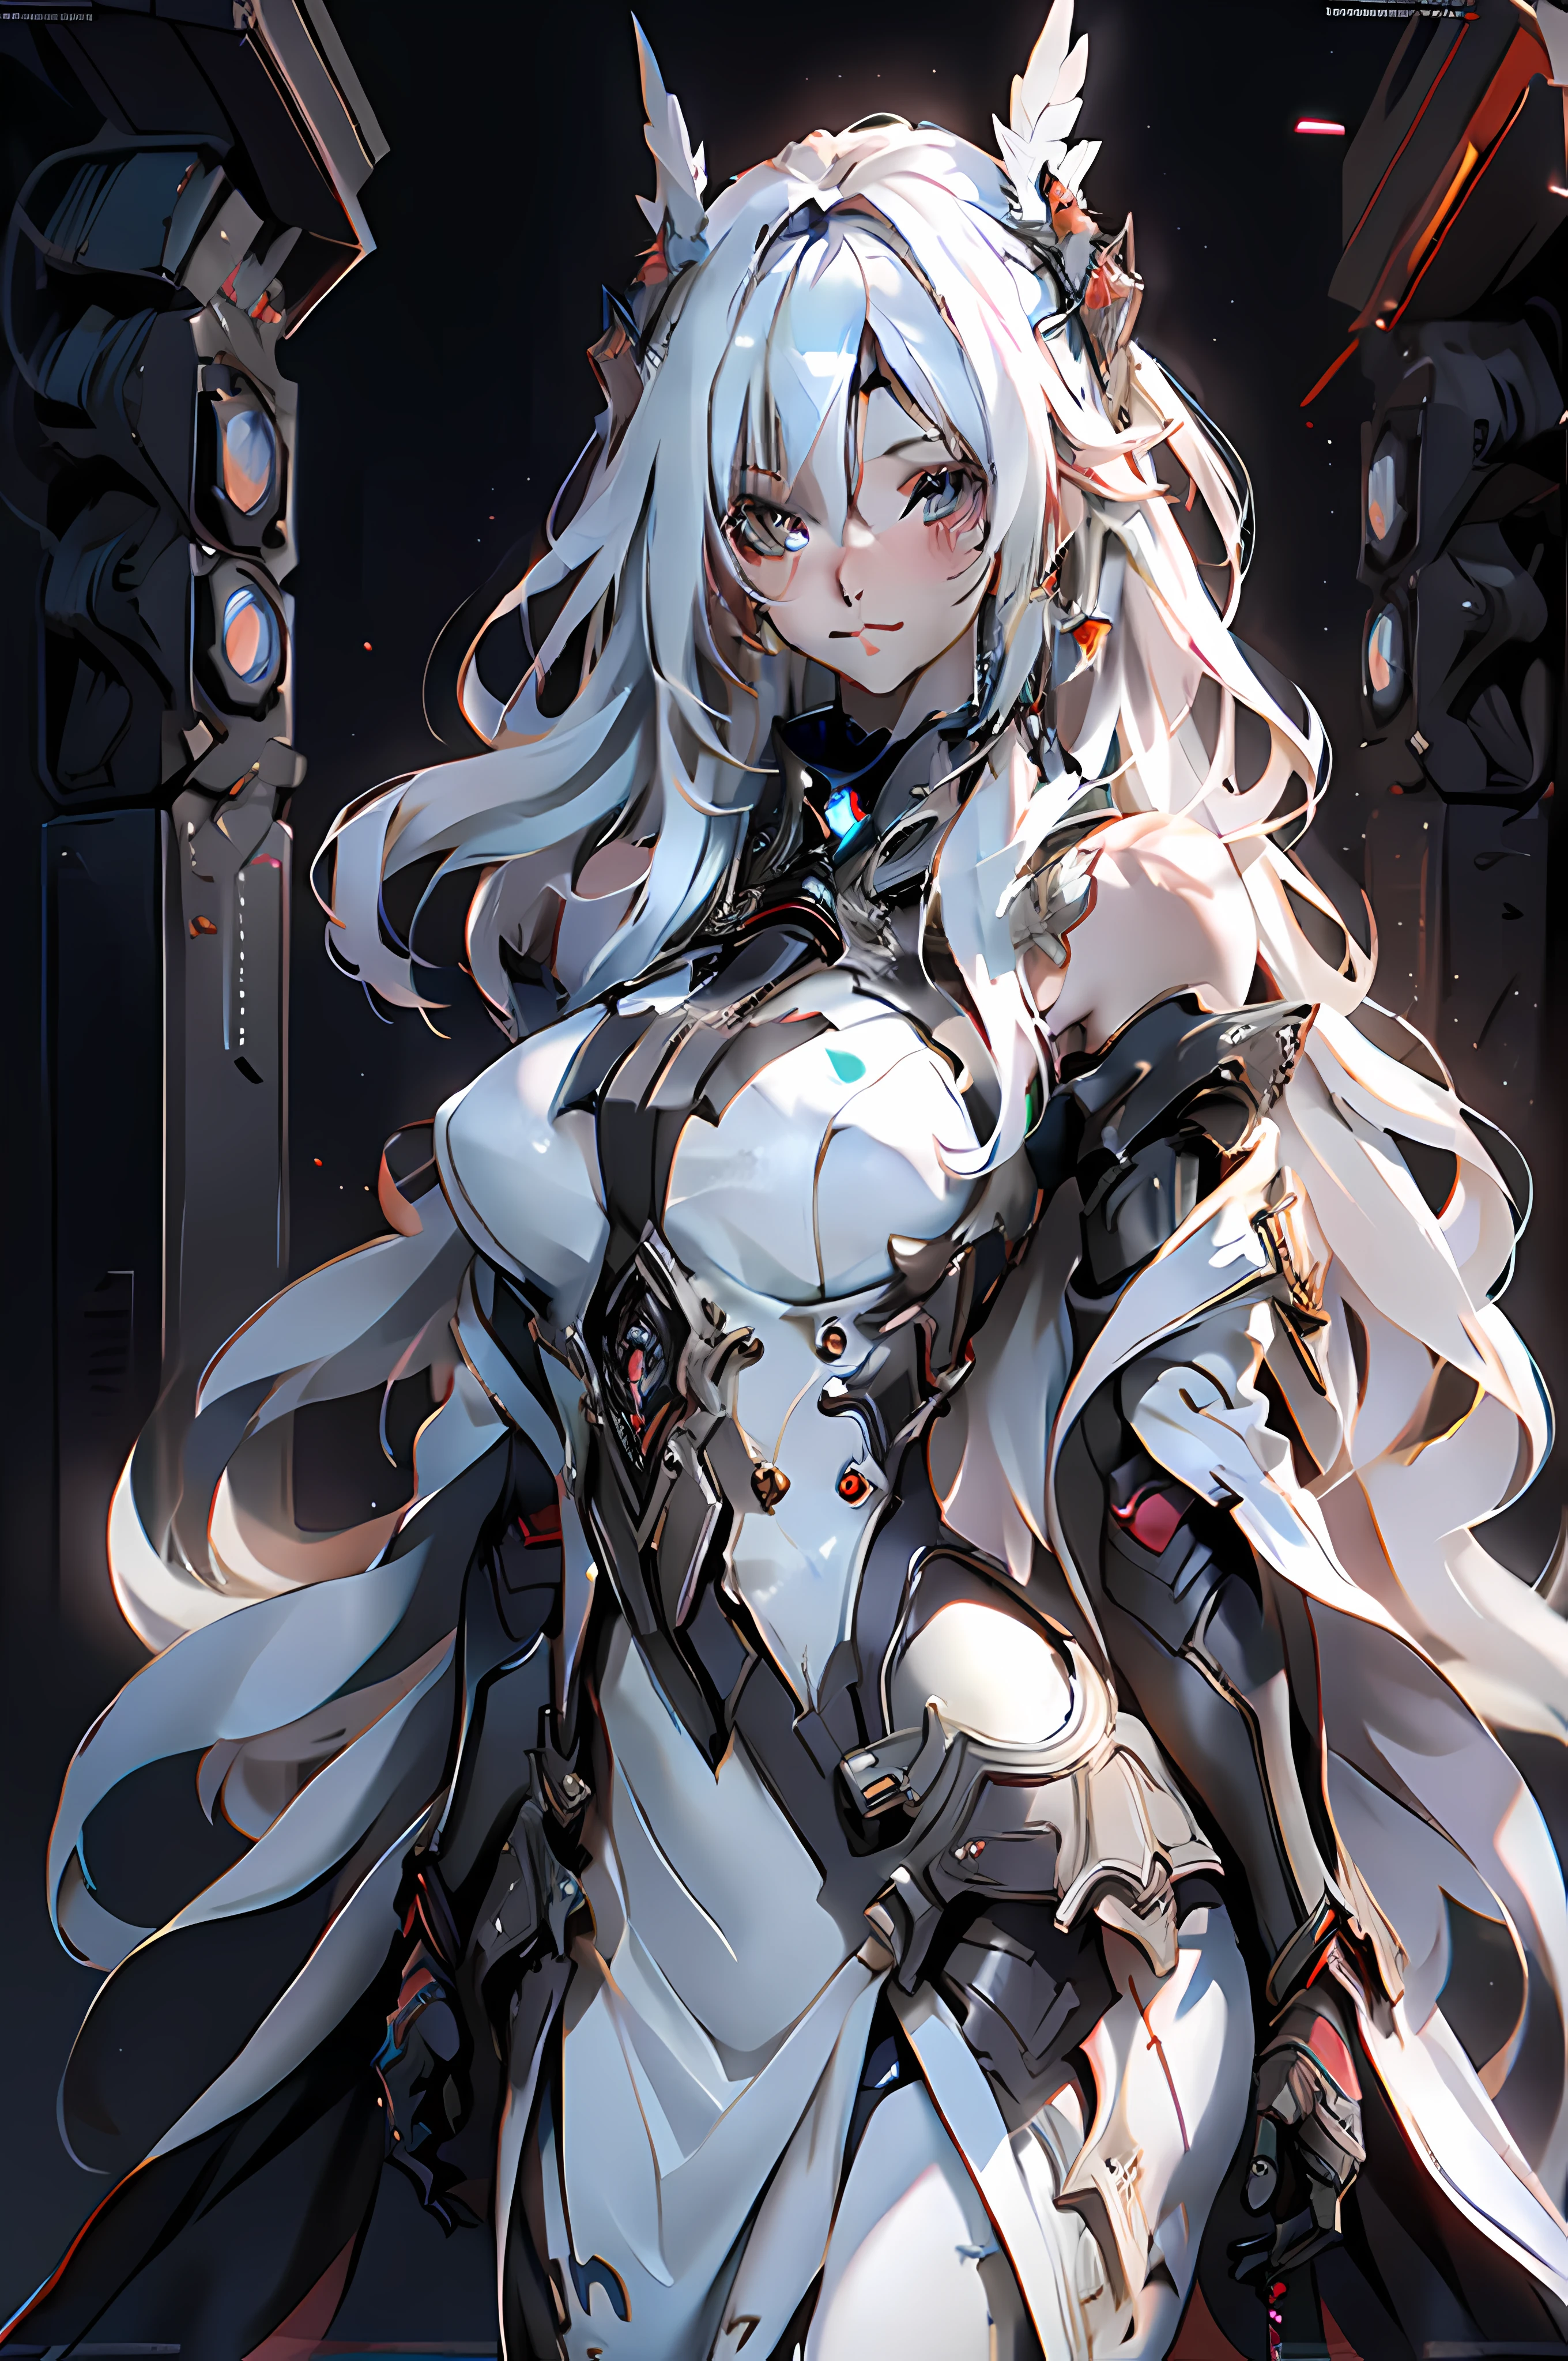 This is a hyper-detail、High resolution and top quality CG Unity 8k wallpaper，The style is cyberpunk，Mainly black and red。A beautiful girl with long hair with white messy white hair appears in the picture，s delicate face，((best qualtiy)), ((tmasterpiece)), (the detail:1.4), 3D, A beautiful cyberpunk female image,HDR（HighDynamicRange）,Ray traching,NVIDIA RTX,Super-Resolution,Unreal 5,Subsurface scattering、PBR Texture、post-proces、Anisotropy Filtering、depth of fieldaximum definition and sharpnesany-Layer Textures、Albedo e mapas Speculares、Surface Coloring、Accurate simulation of light-material interactions、perfectly proportions、Octane Render、Two-colored light、largeaperture、Low ISO、White balance、the rule of thirds、8K RAW、big breasts exposed cleavage，cropped shoulders，camisole